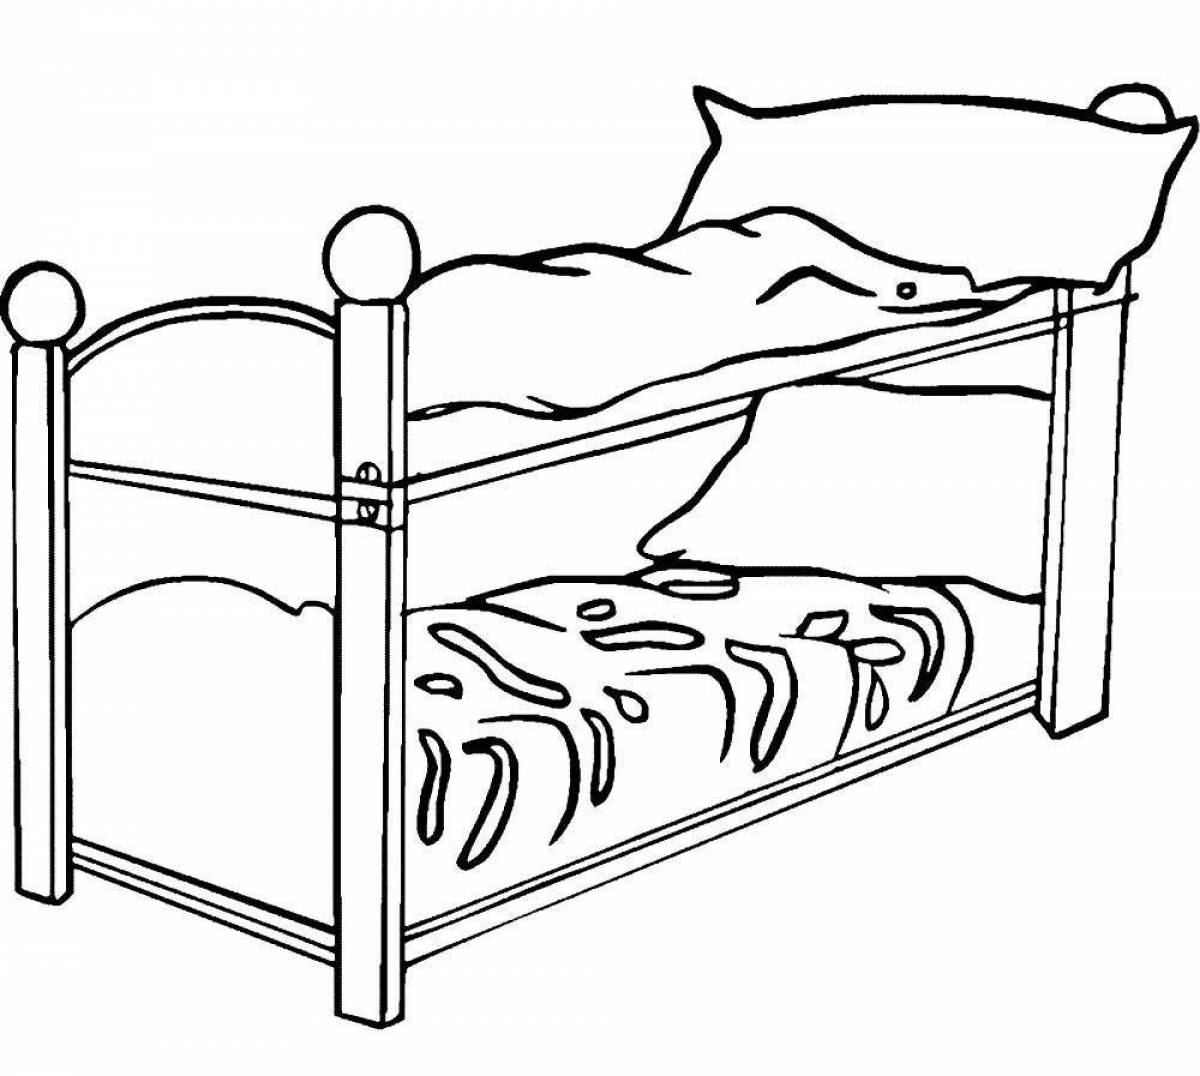 Fun bed coloring for kids